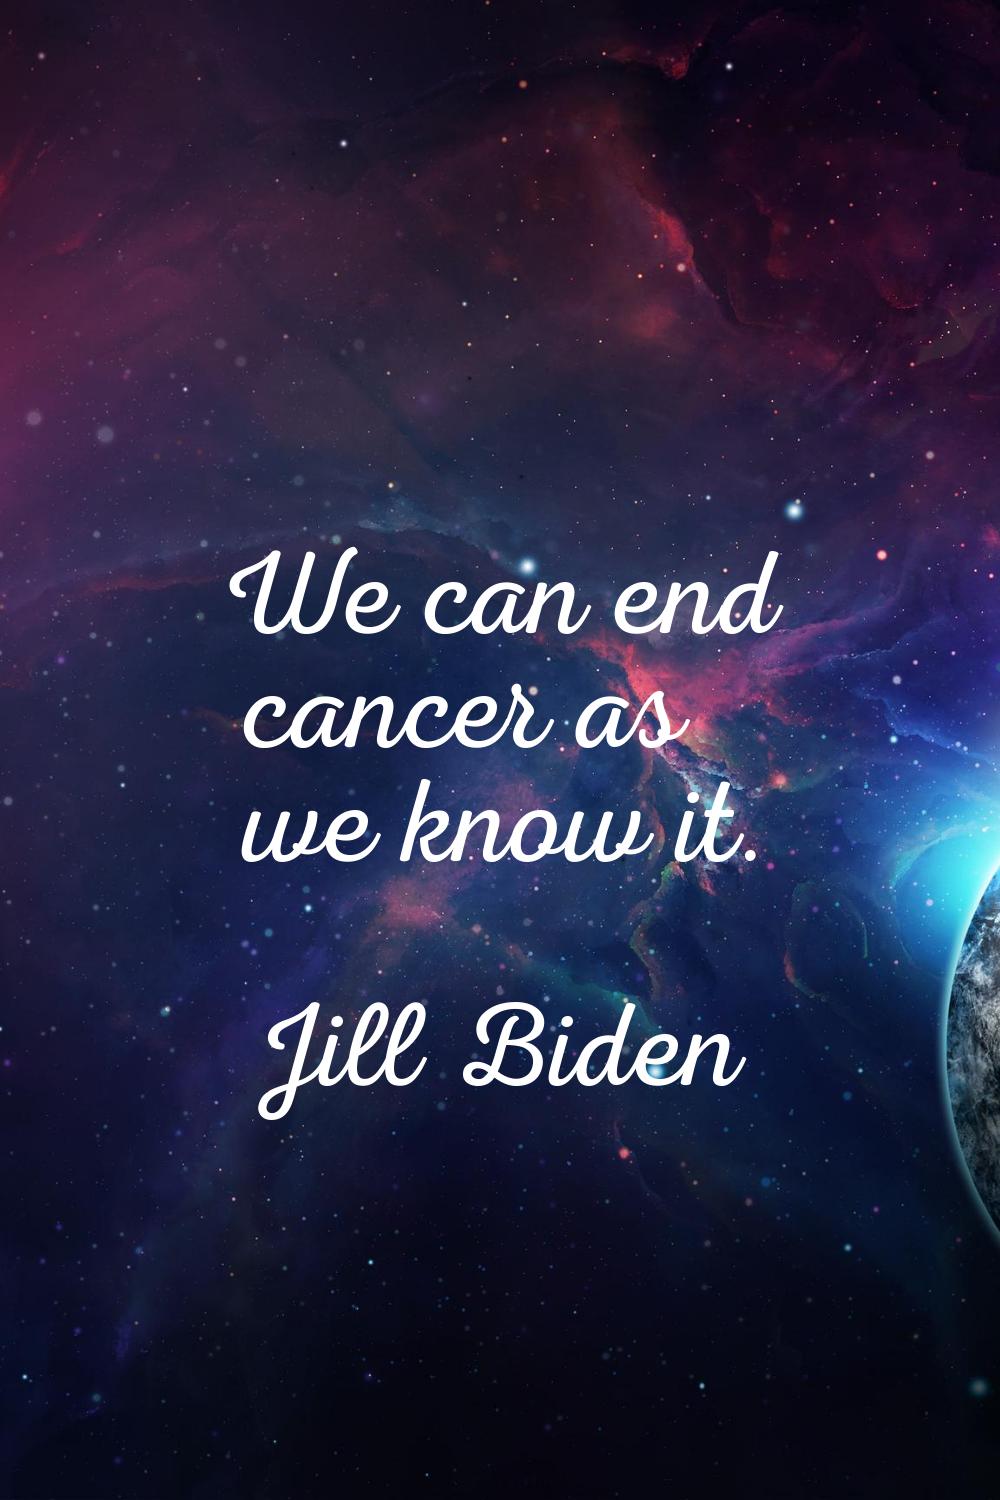 We can end cancer as we know it.